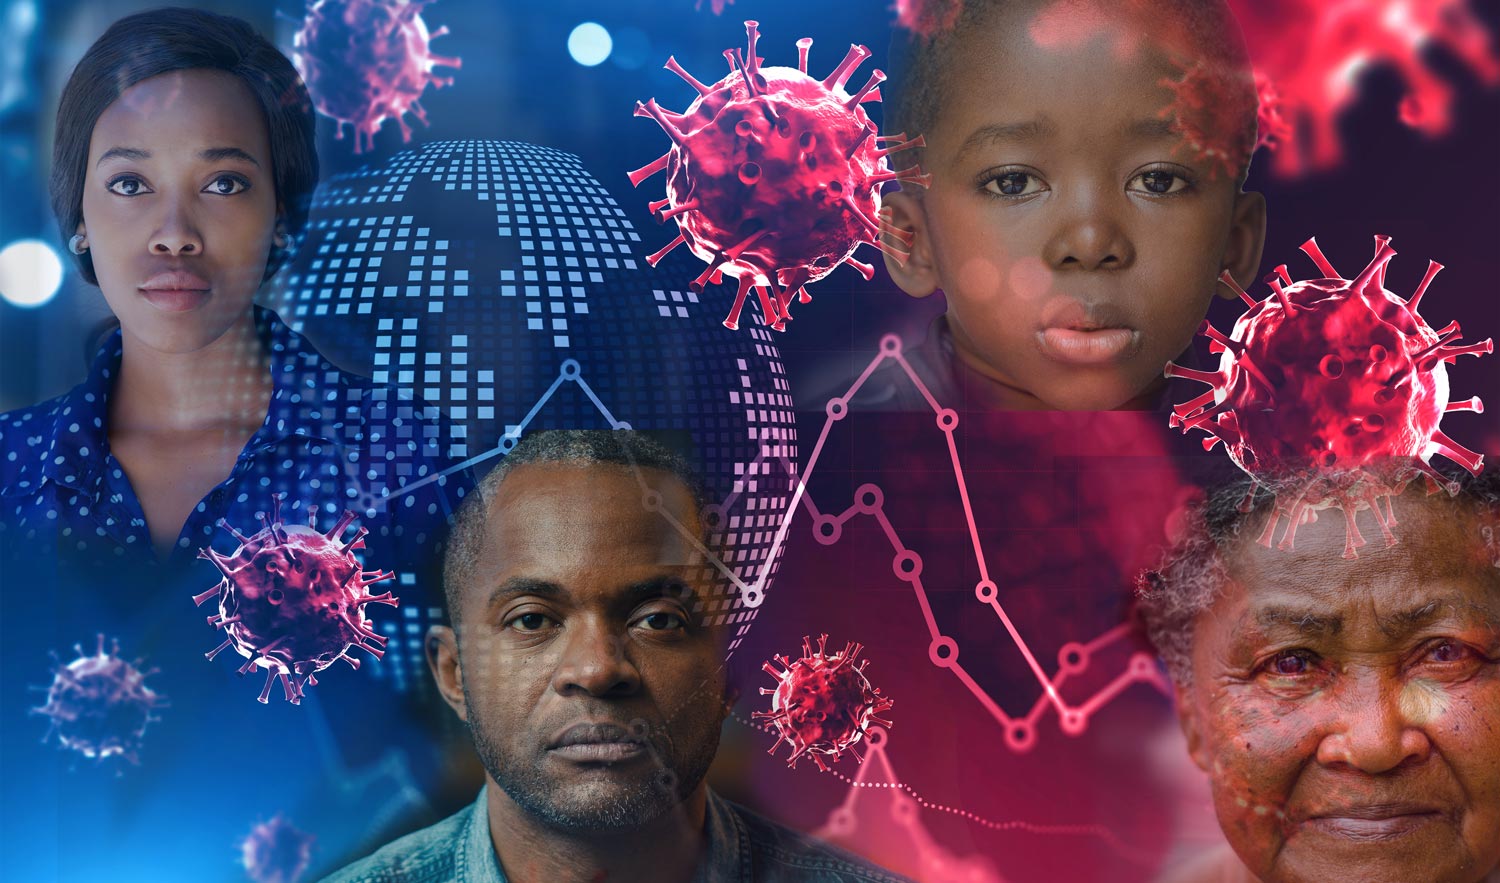 images of a young woman, and older man, a little boy and an elderly woman superimposed with viral and data imagery